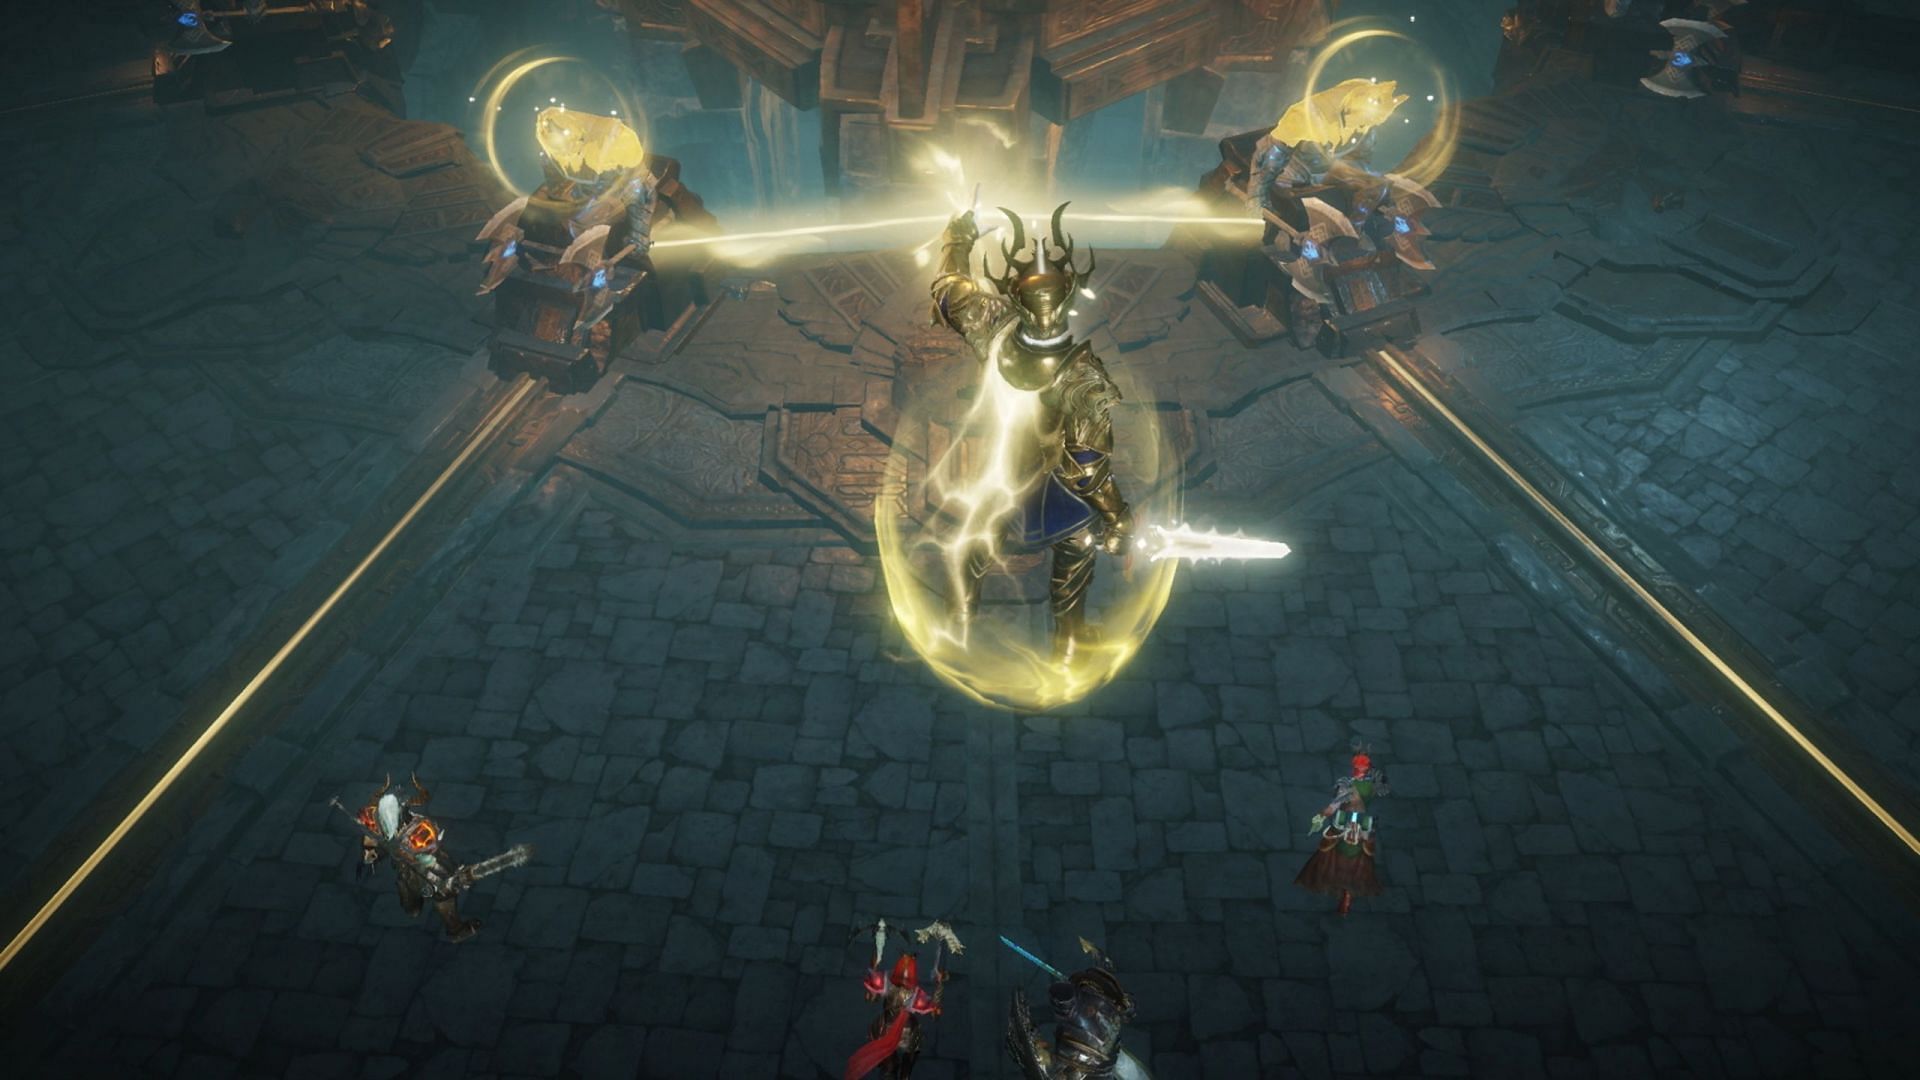 Diablo Immortal gameplay (Image by Blizzard)